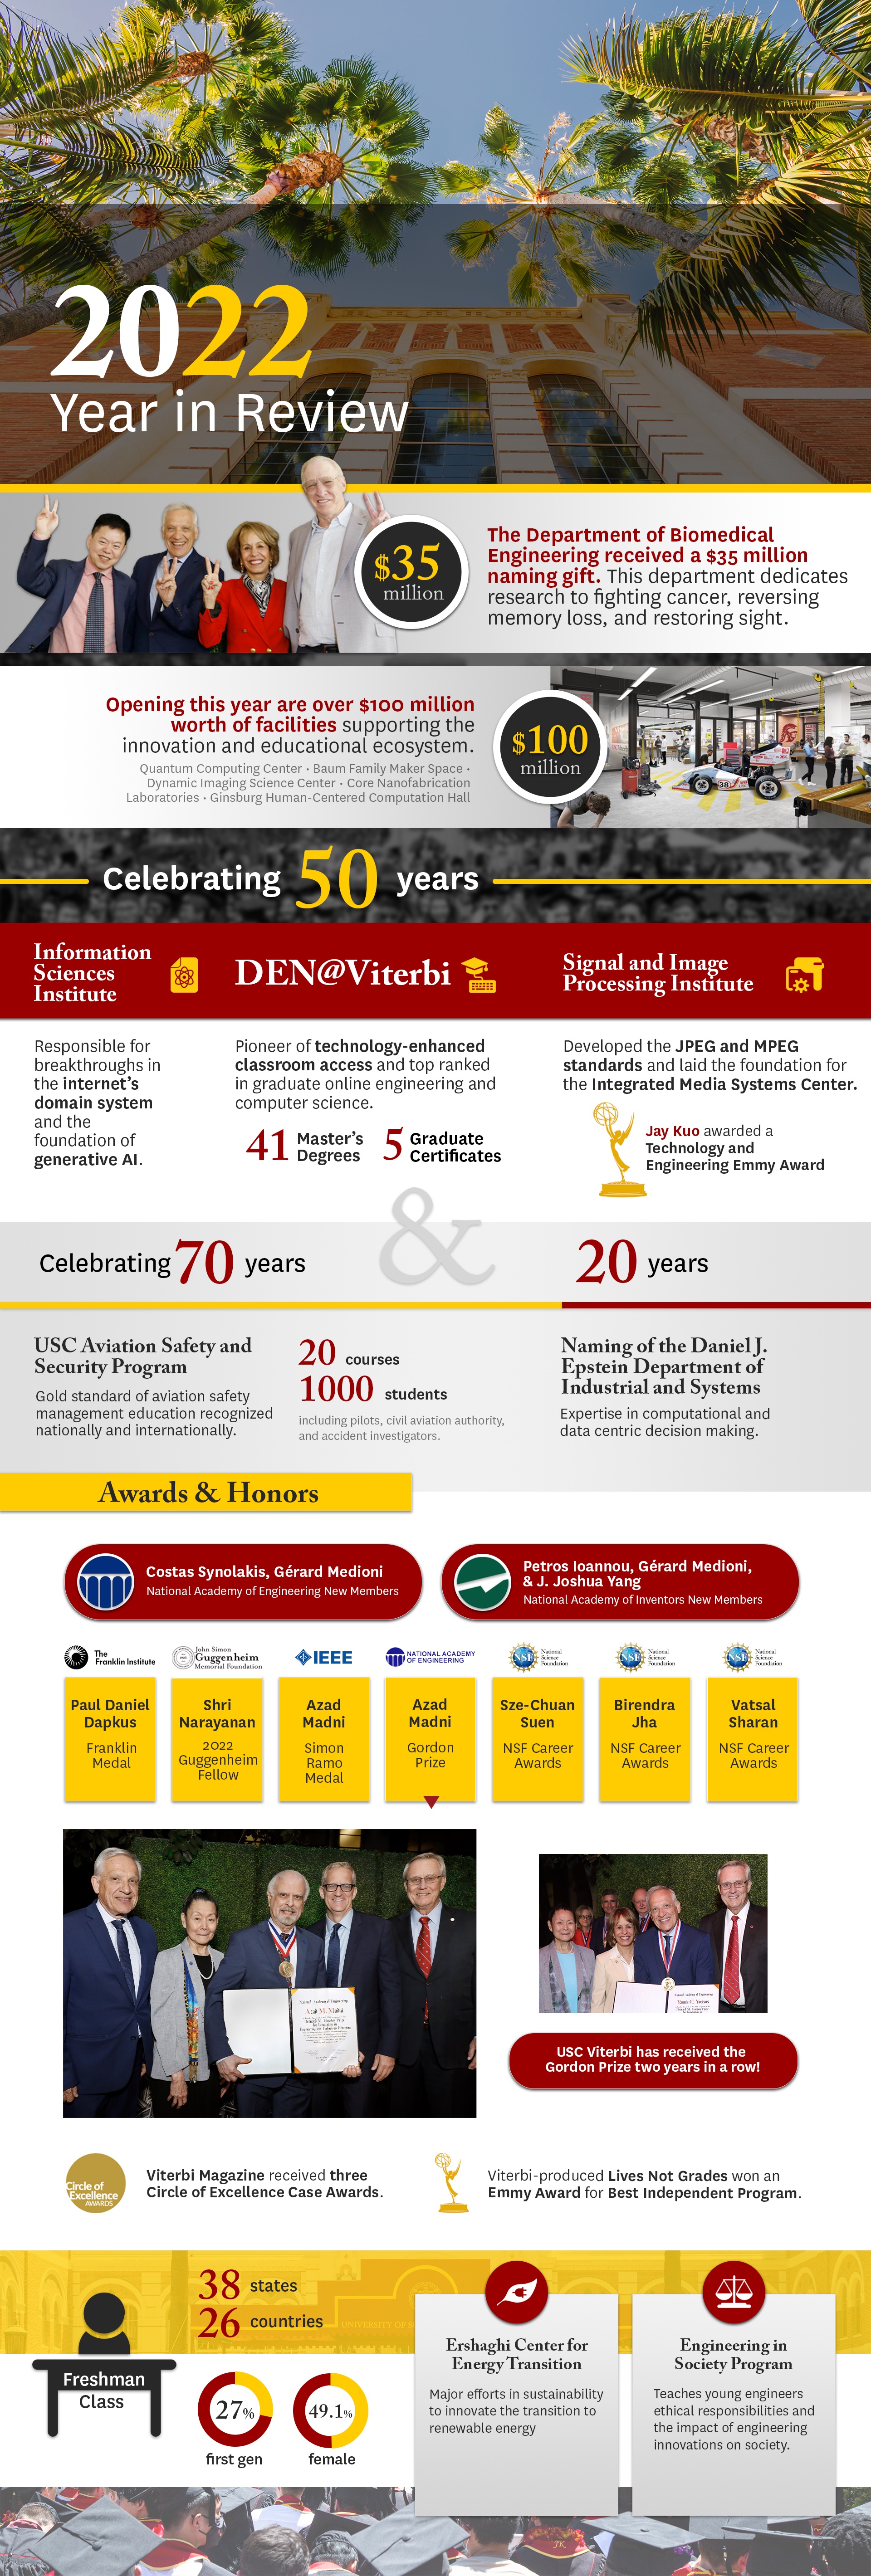 USC_VSE_2021YearInReviewInfoGraphic_20220406